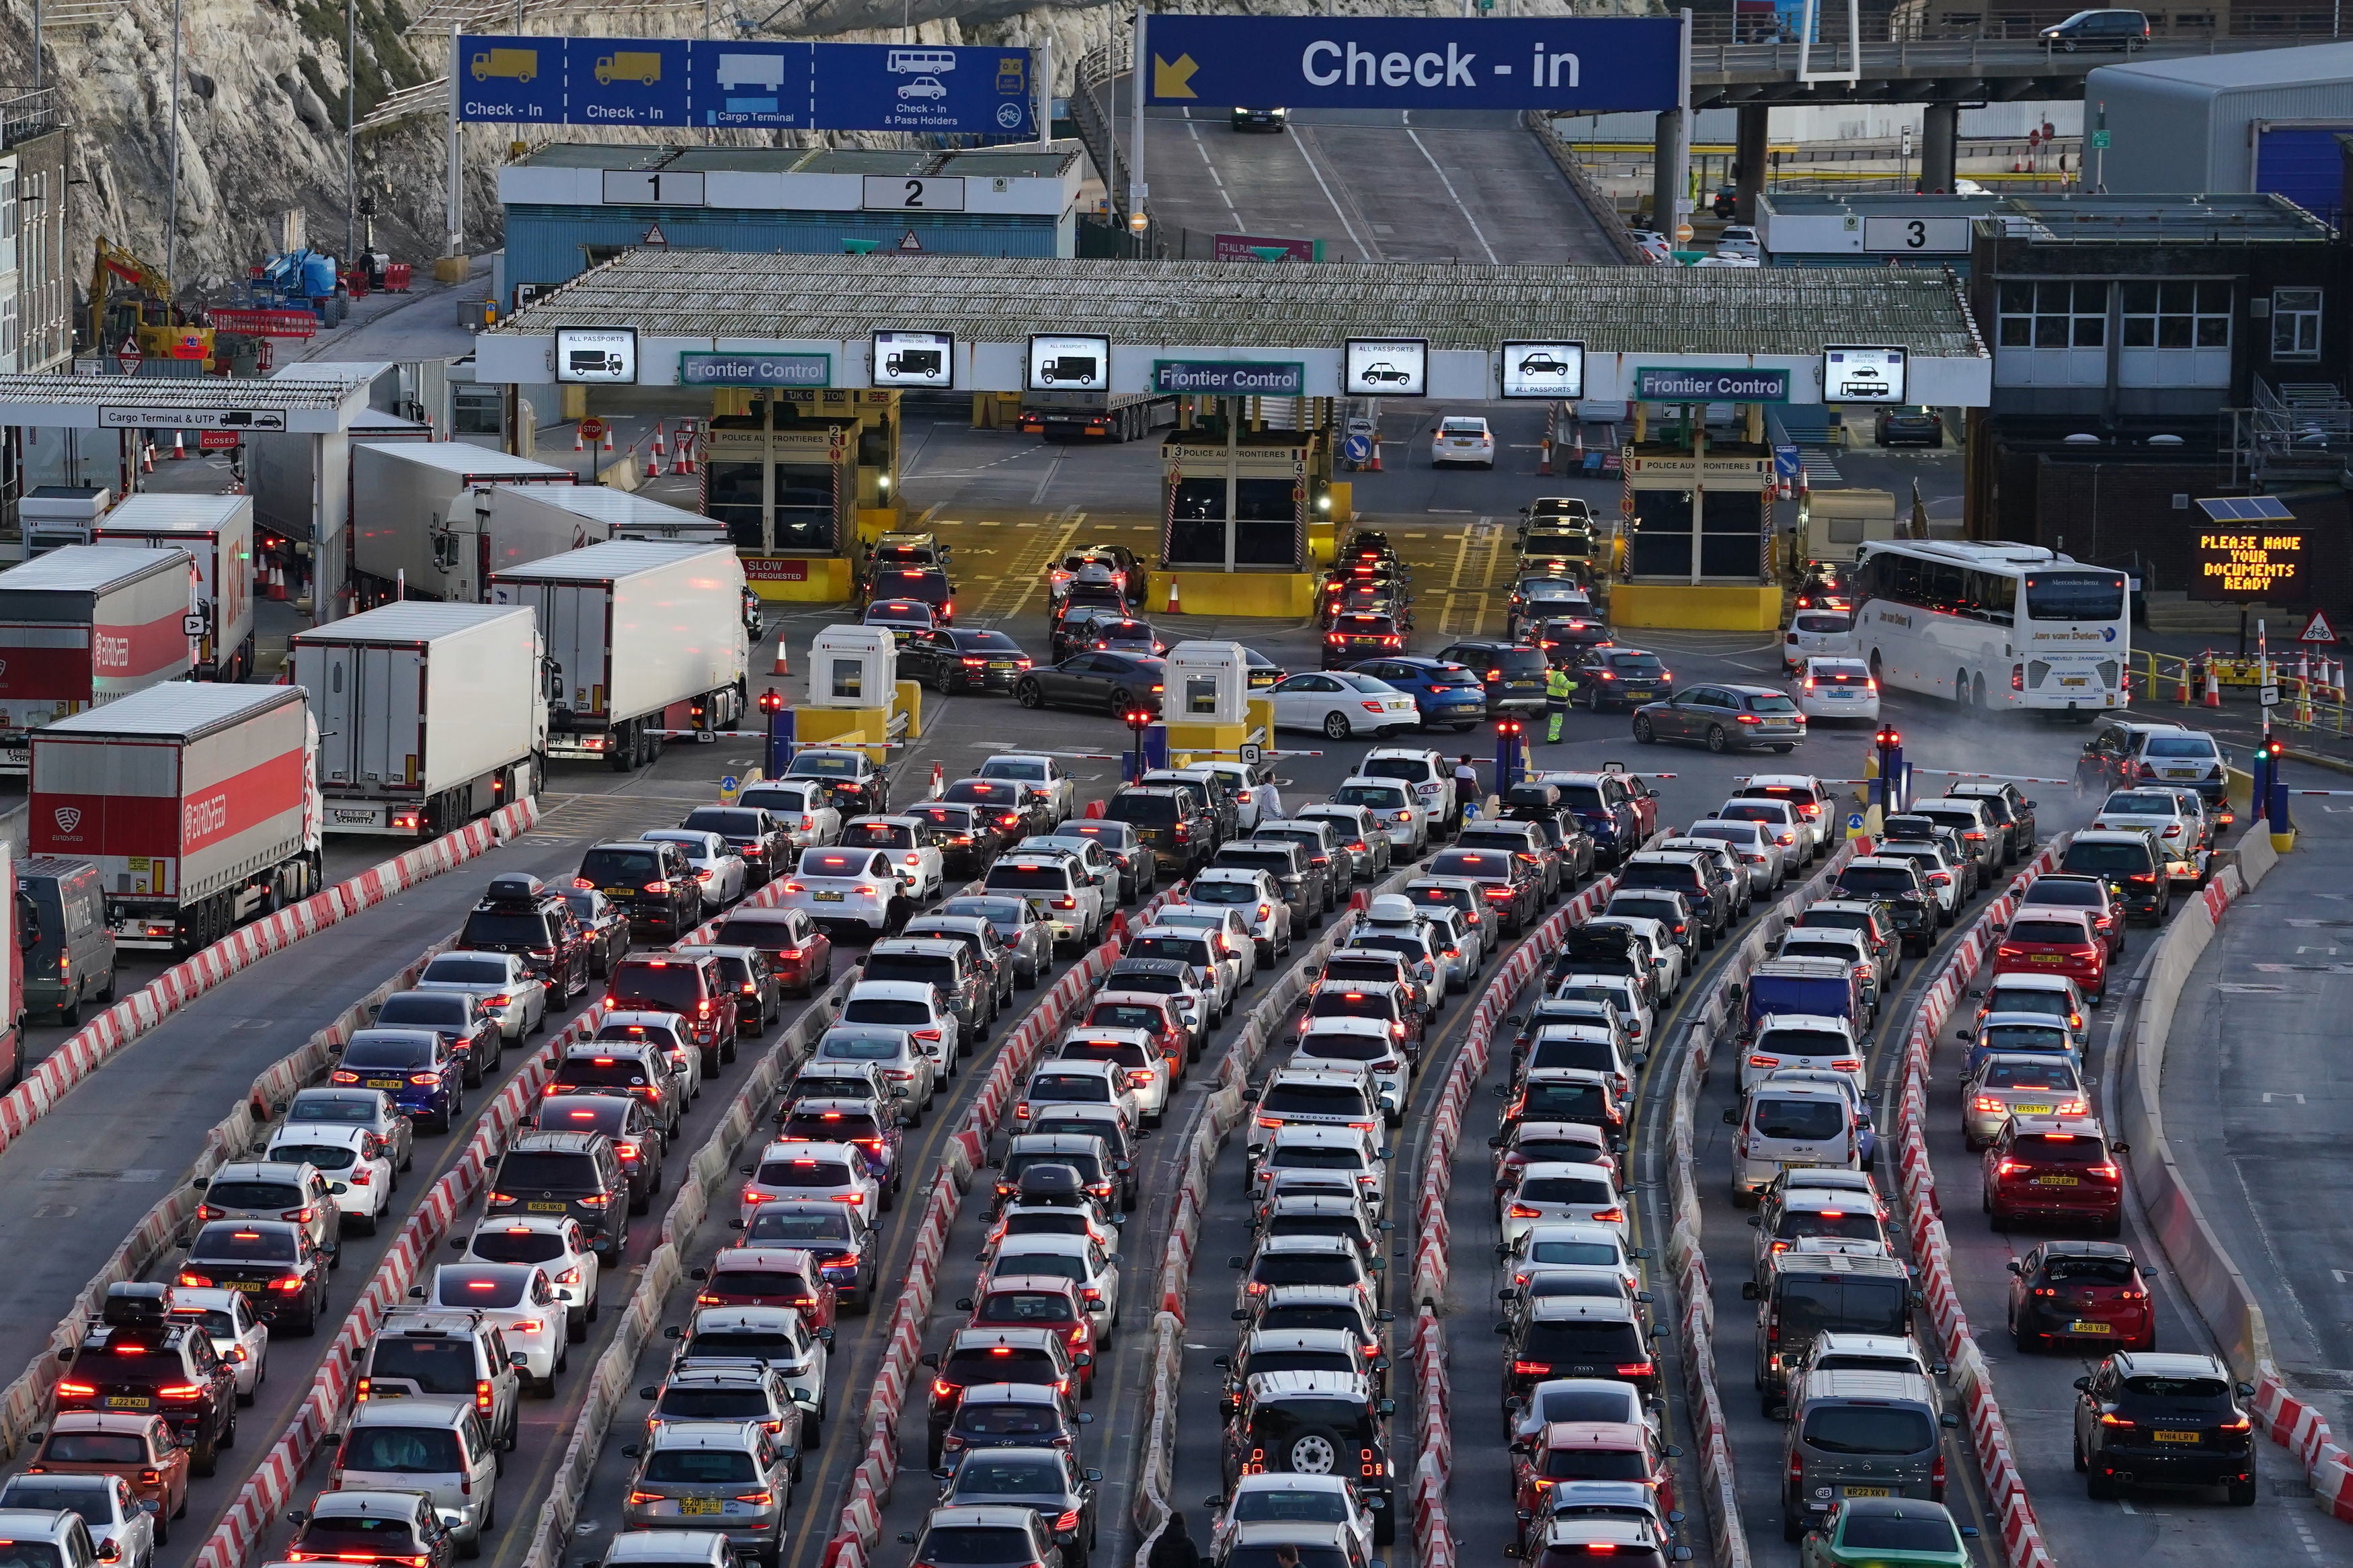 Drivers queue for ferries at Dover, Kent, as people travel to destinations over the Christmas period